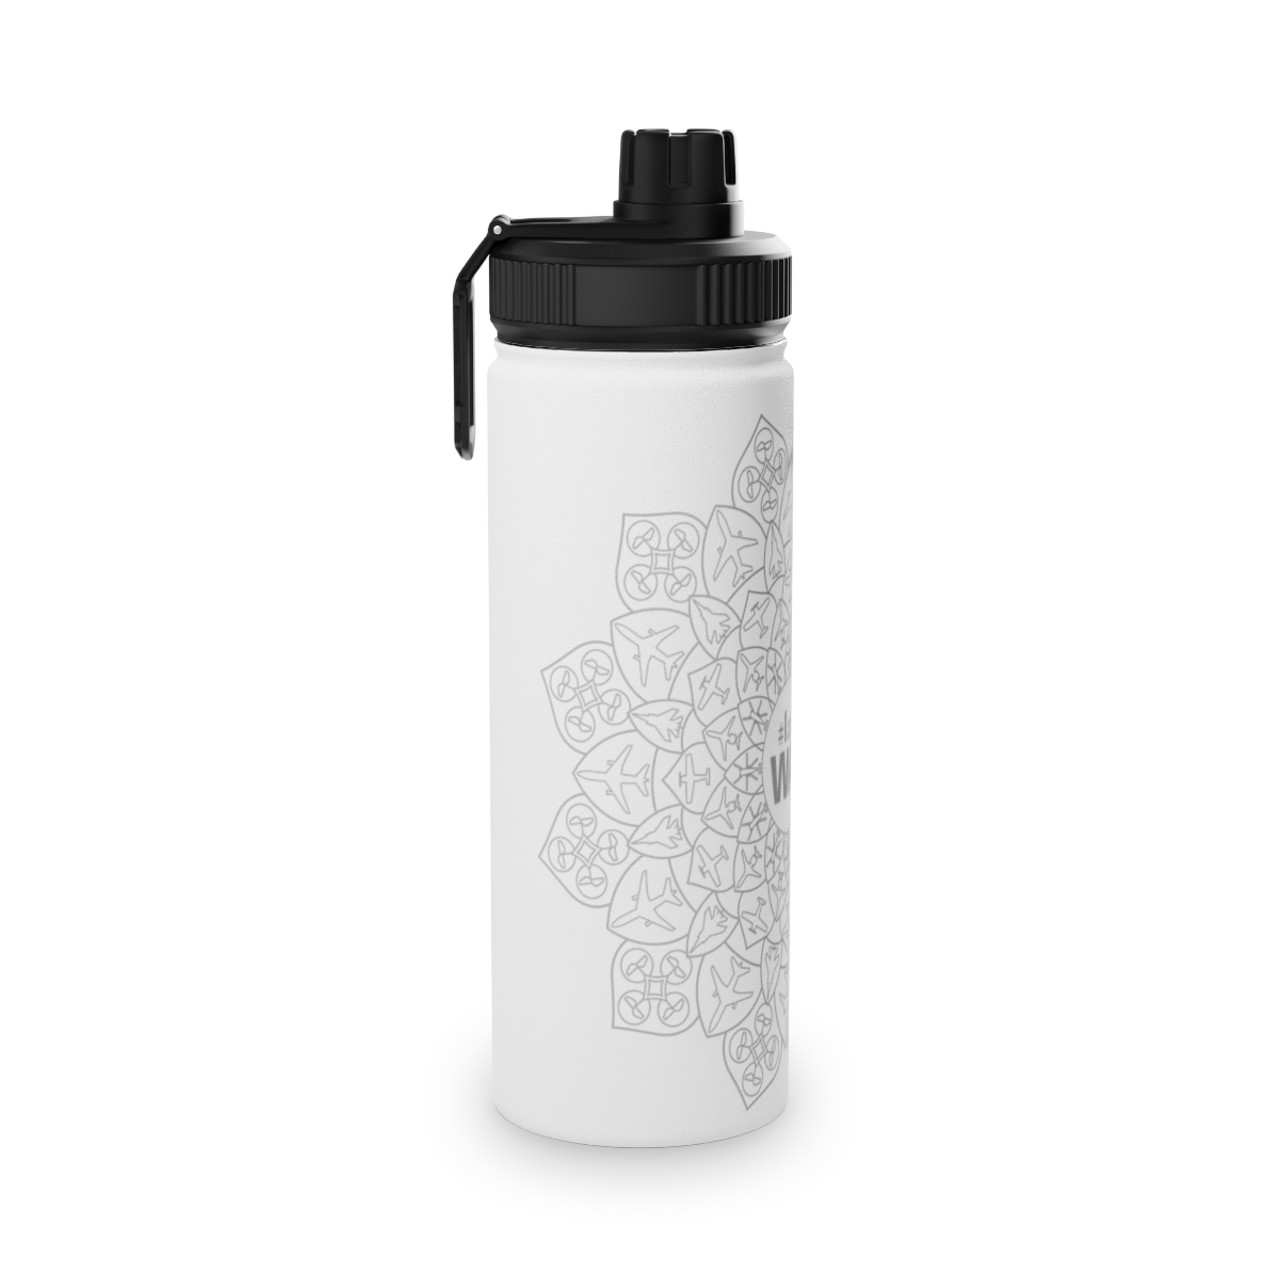 https://cdn11.bigcommerce.com/s-sqlllpksfp/images/stencil/1280x1280/products/214/794/18-oz-white-stainless-steel-water-bottle-with-sports-lid__39503.1696438119.jpg?c=1?imbypass=on